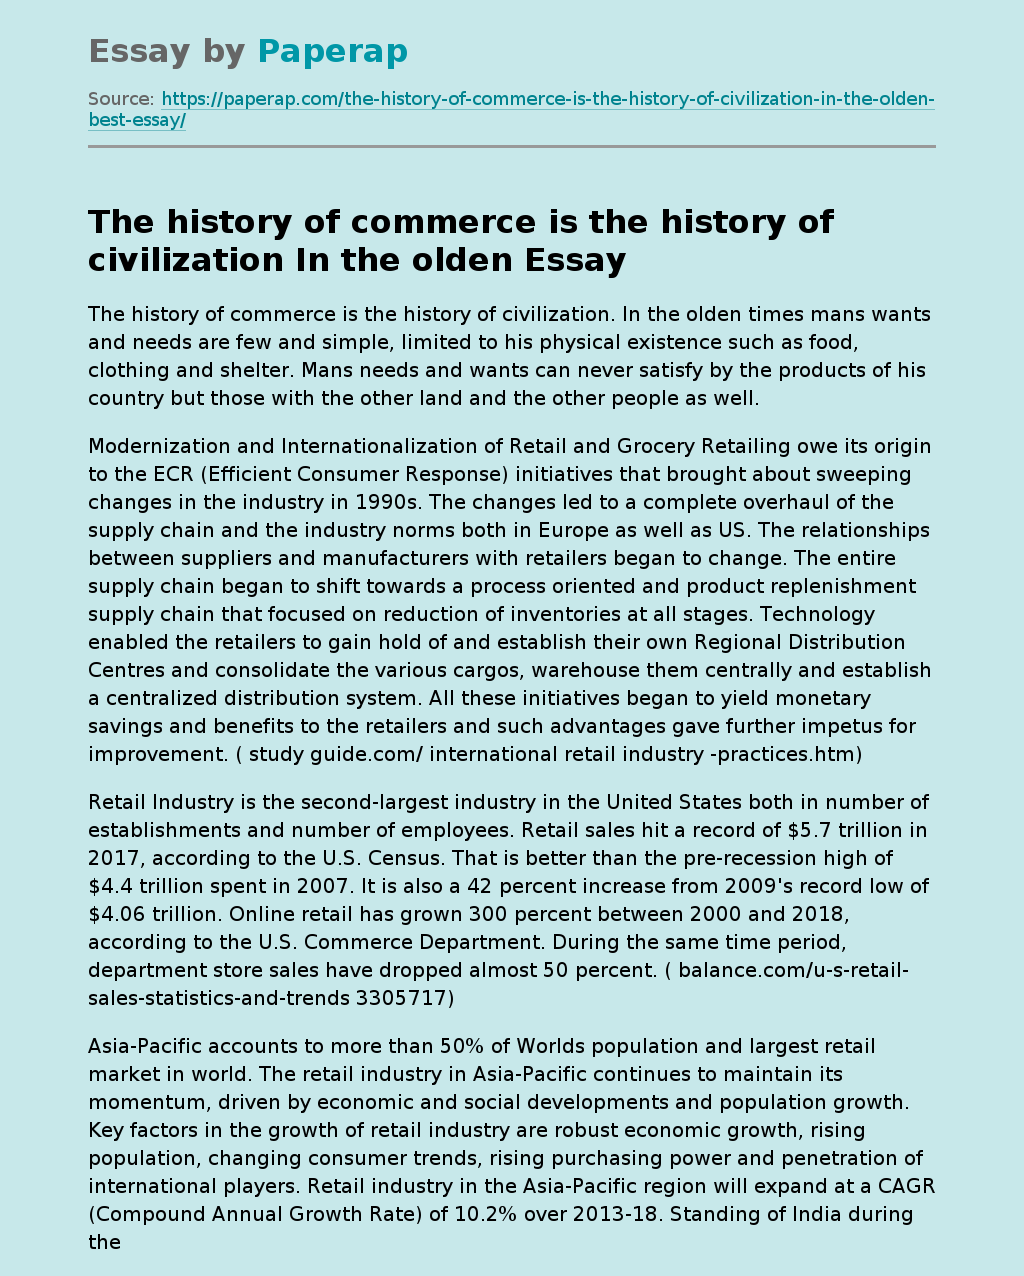 The History of Commerce Is the History of Civilization